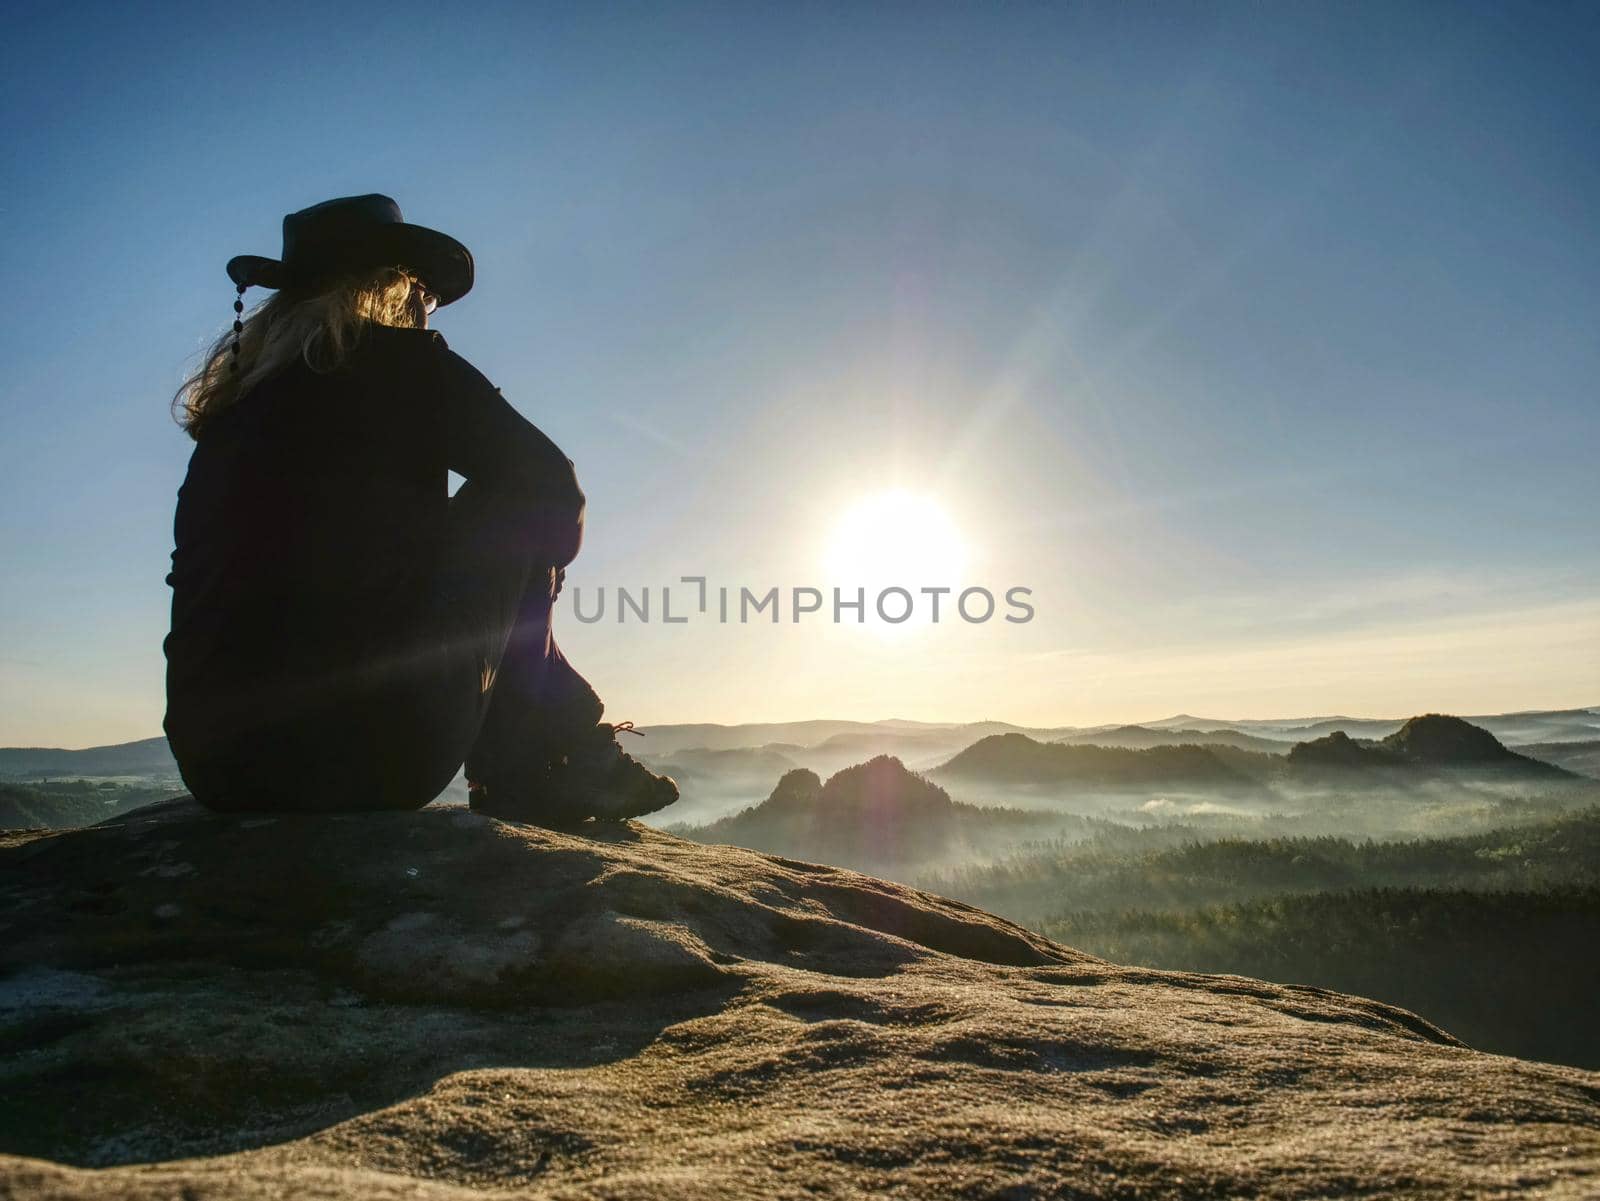 Cute light hair woman enjoying the outdoors at the mountain. Sports figure sit on rough rocky ground